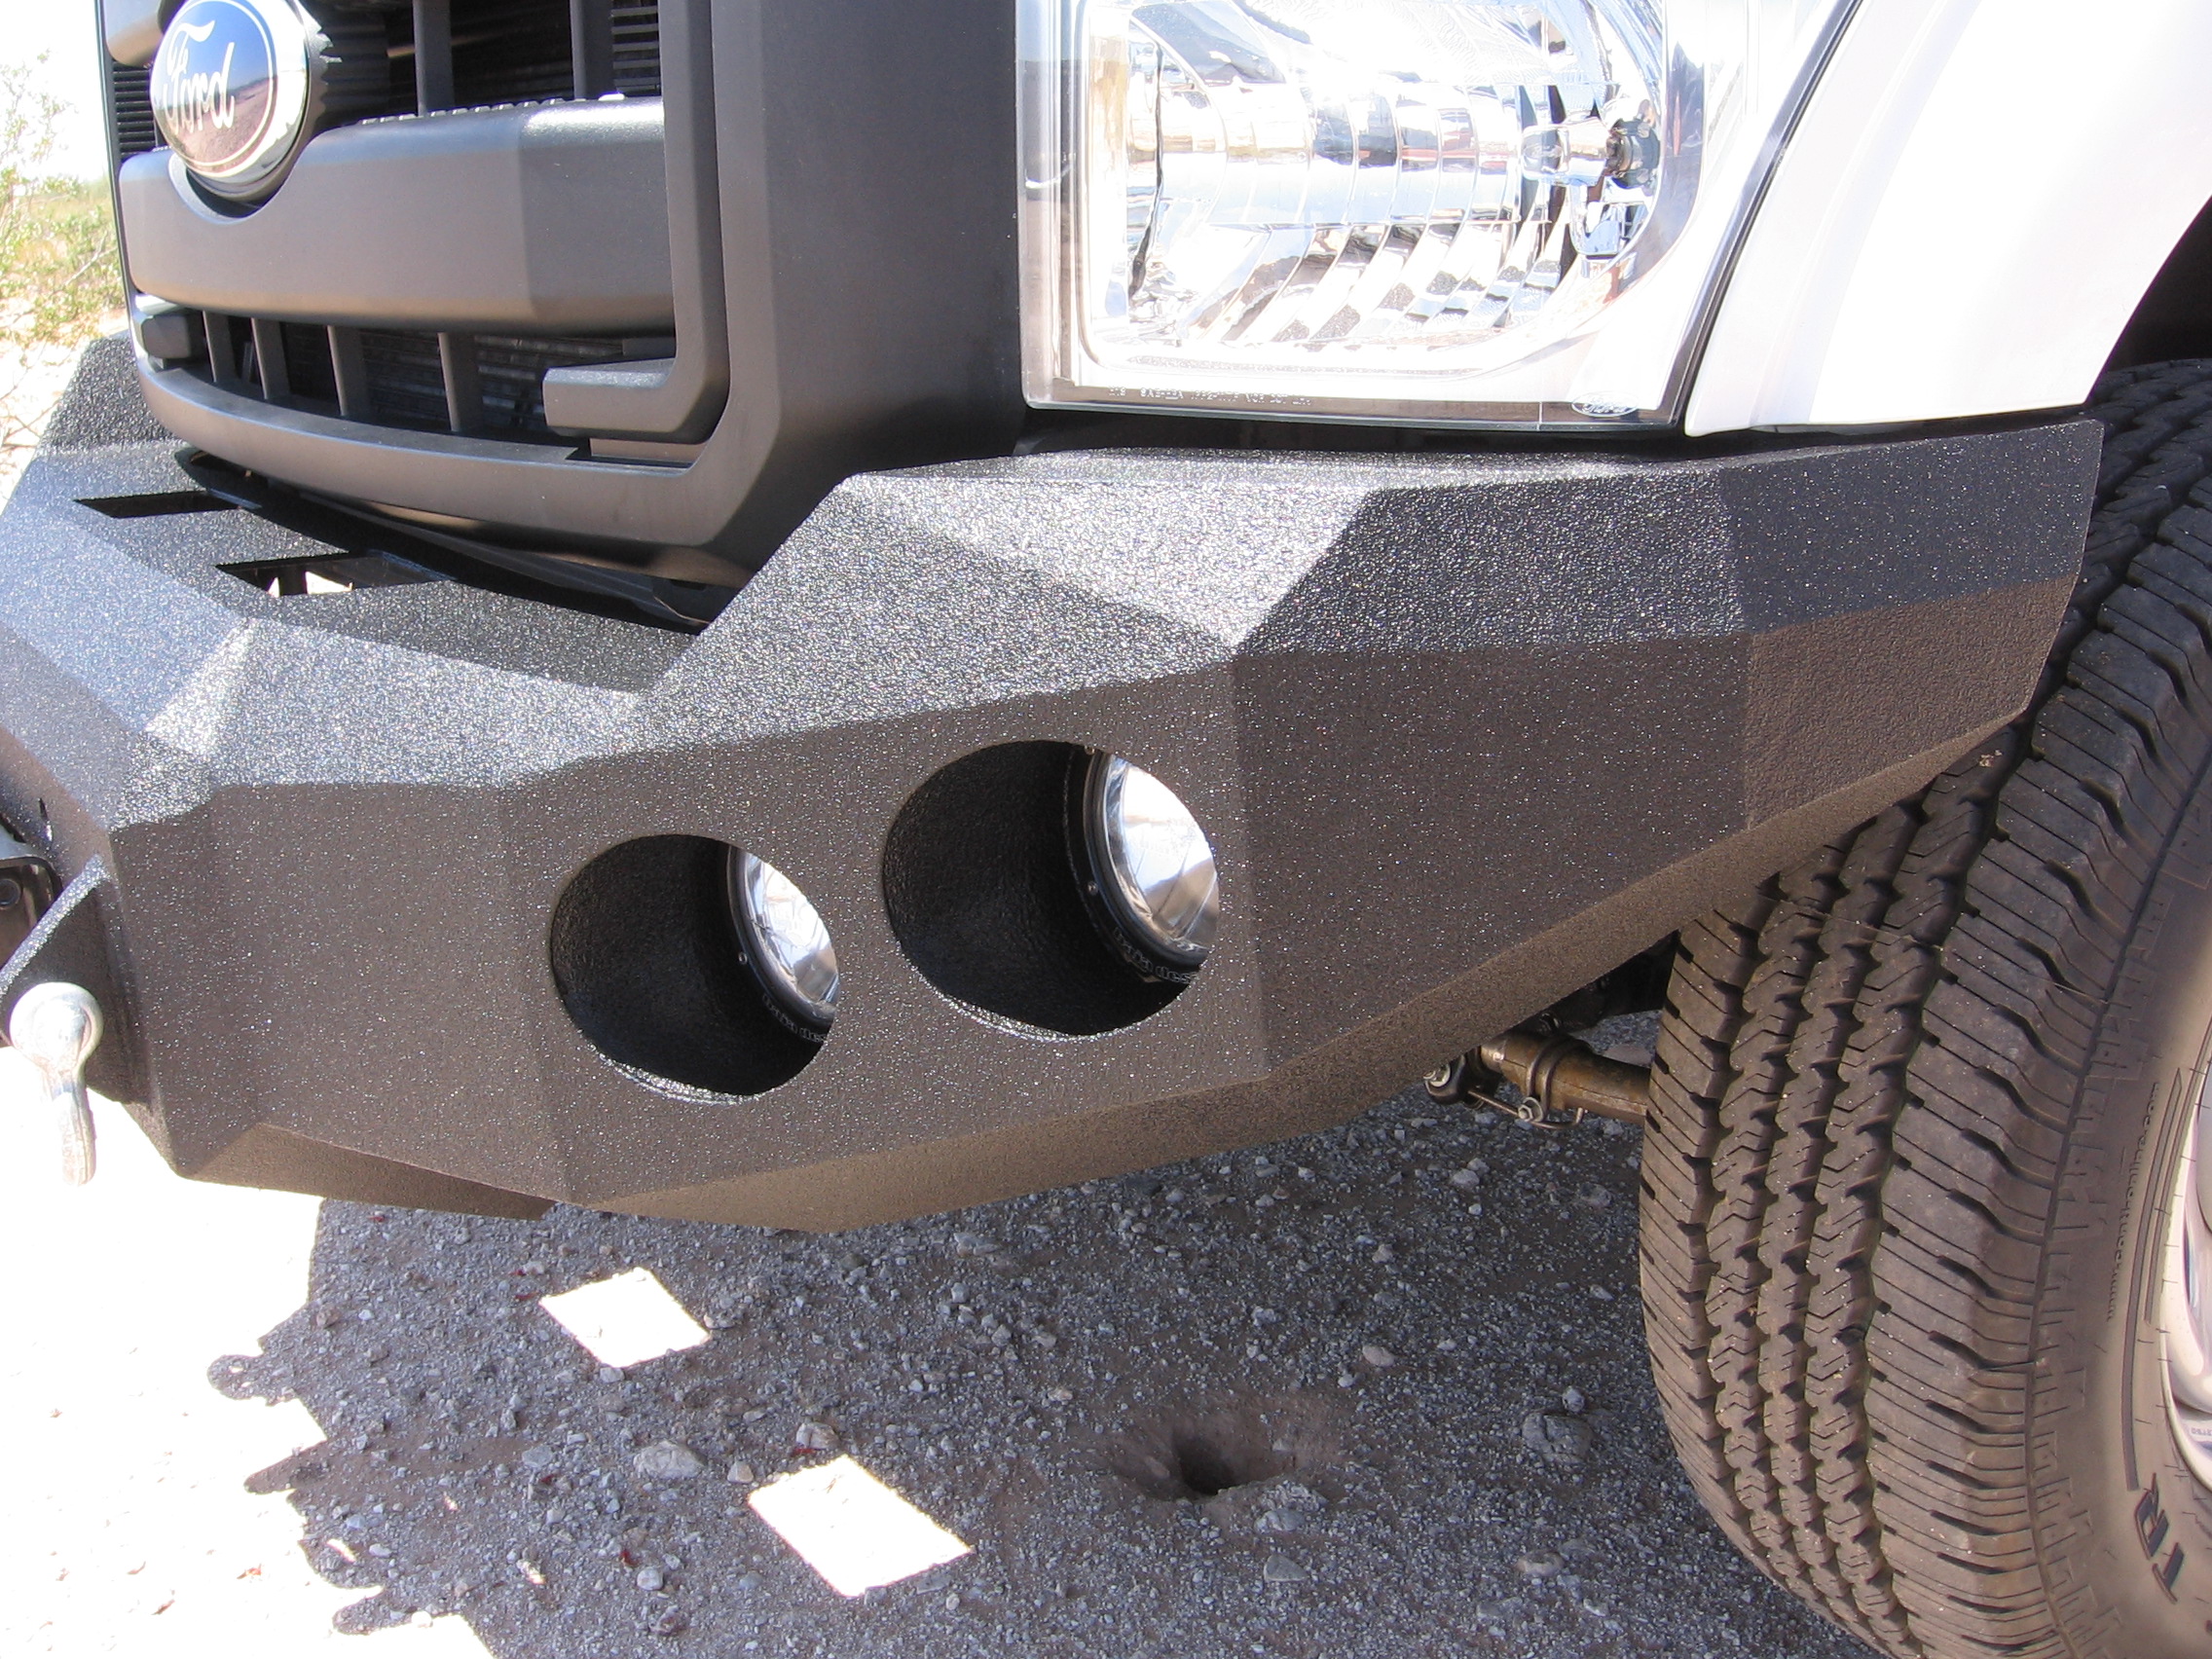 11-16 Ford F250 front base bumper